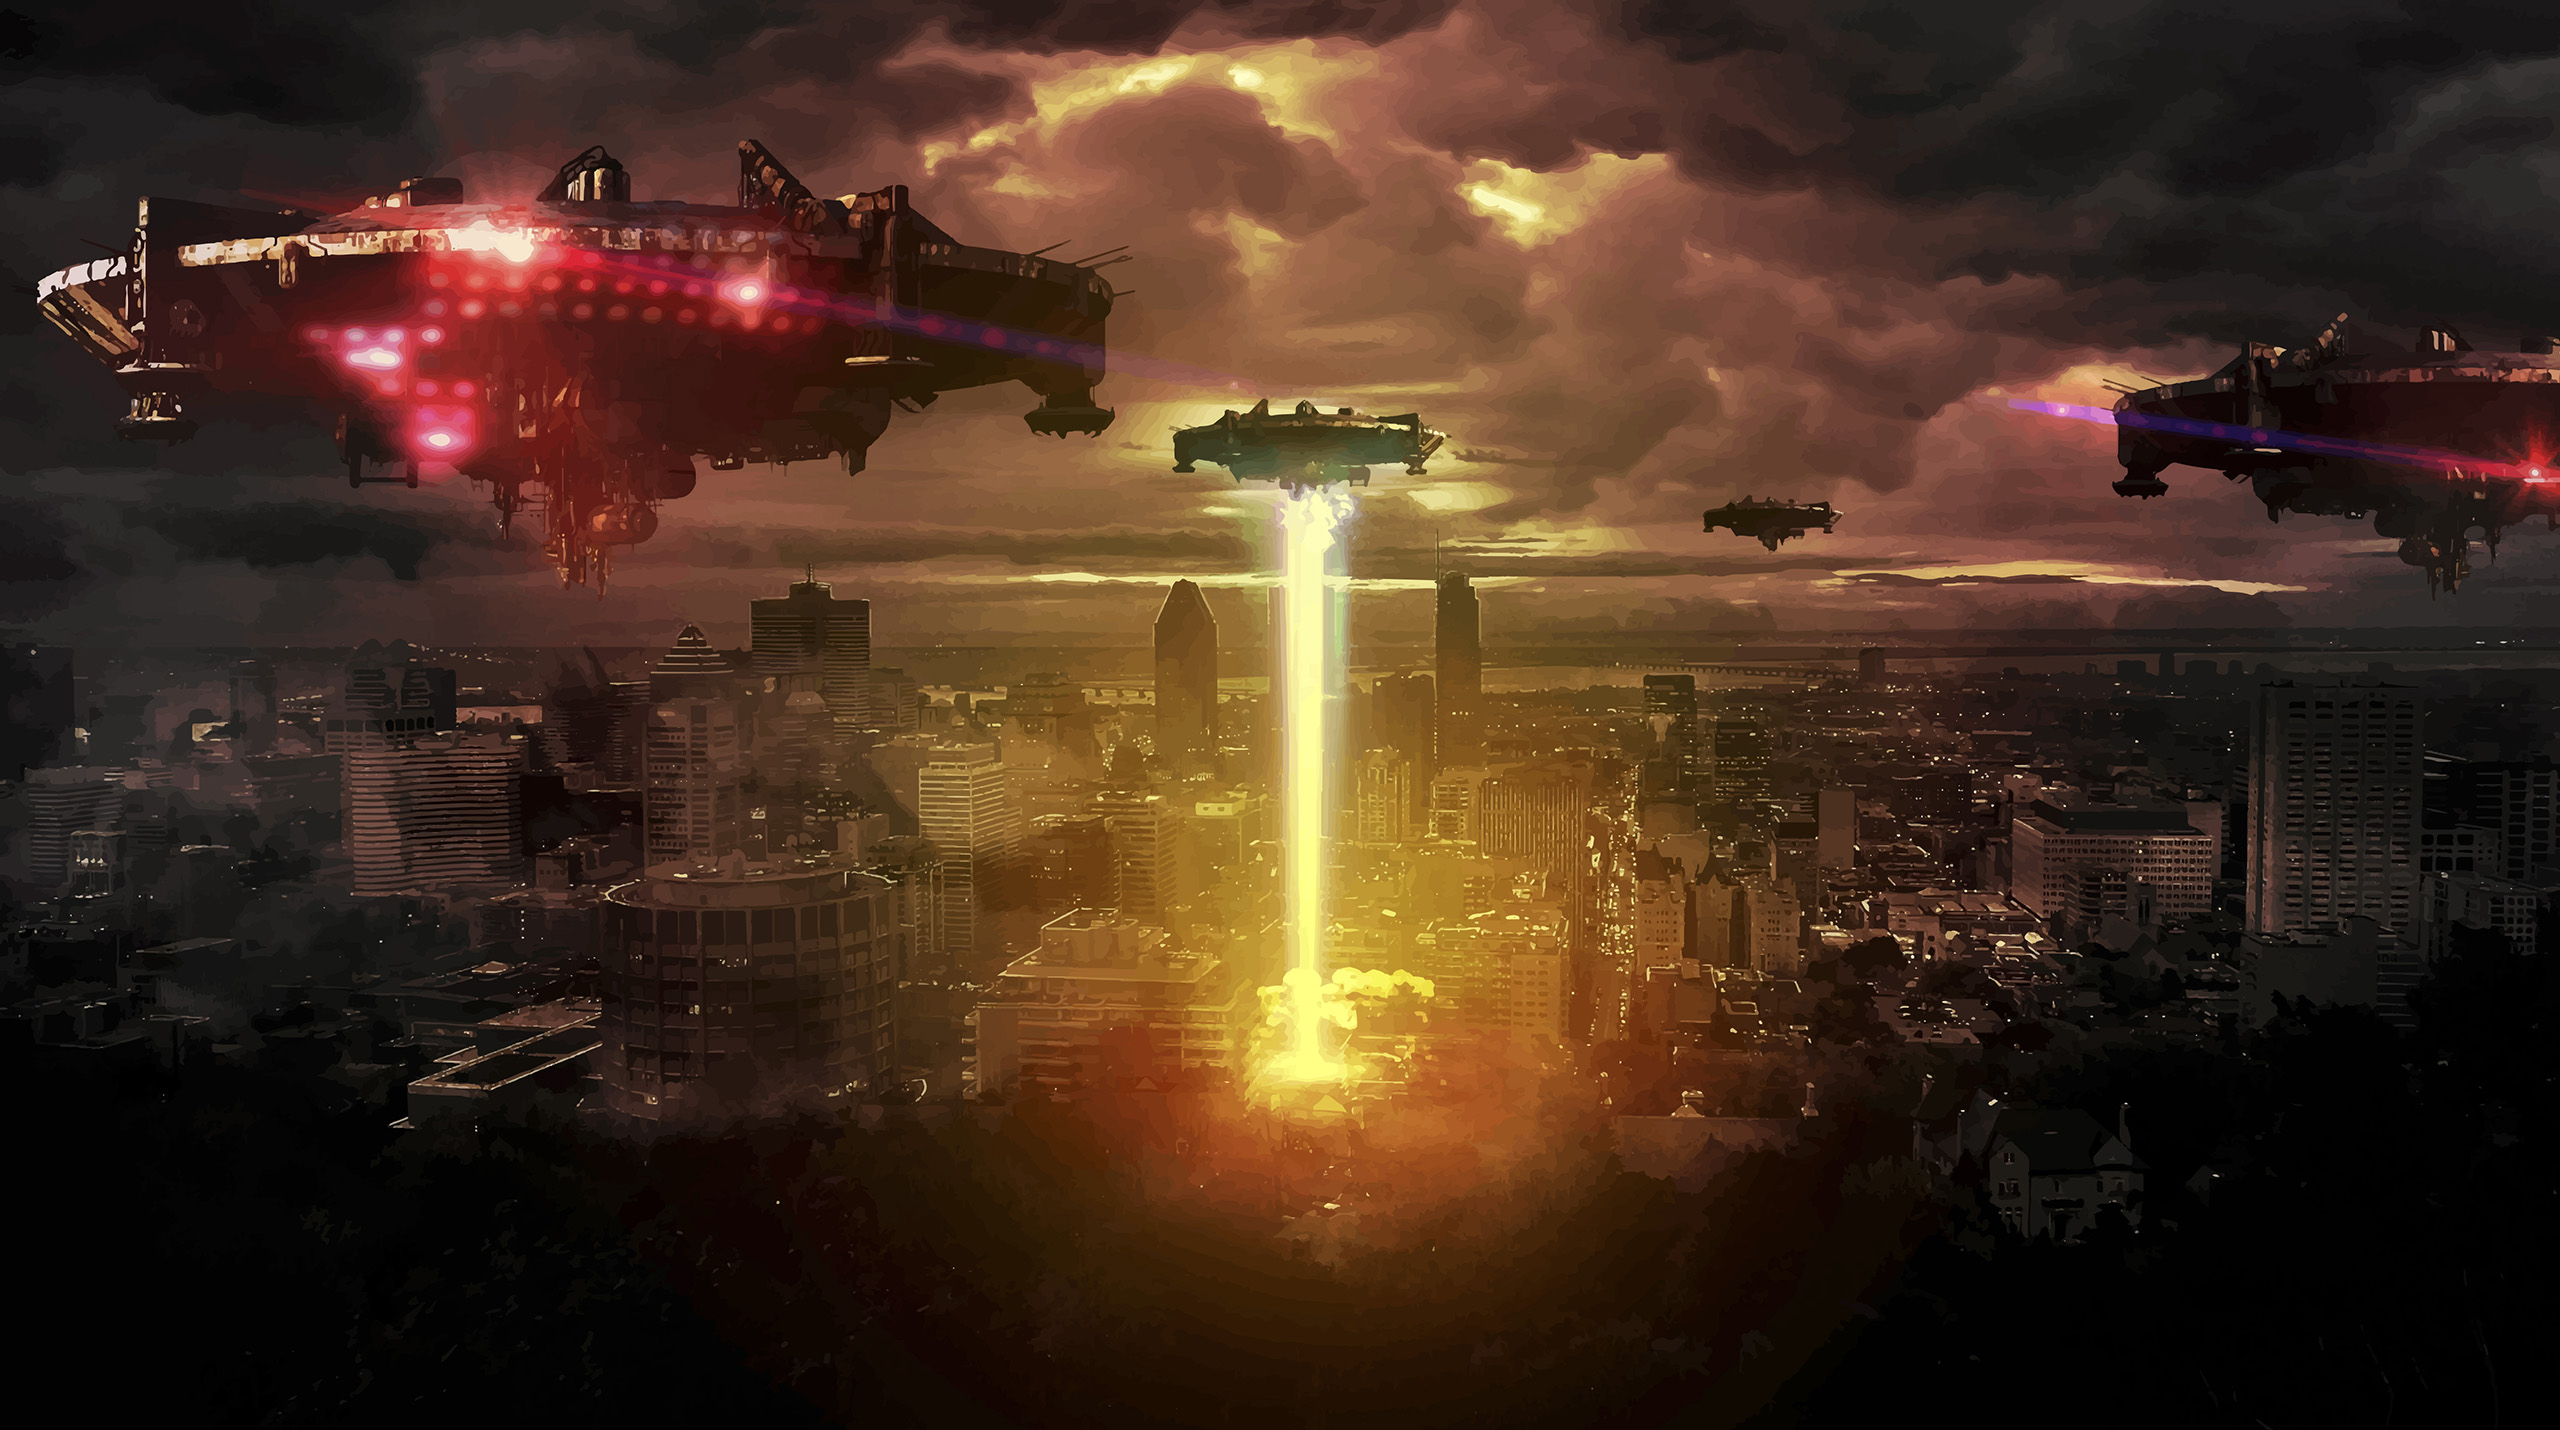 General 2560x1430 UFO alien invasion alien attack mothership photo manipulation laser war explosion movies photoshopped science fiction apocalyptic digital art low light